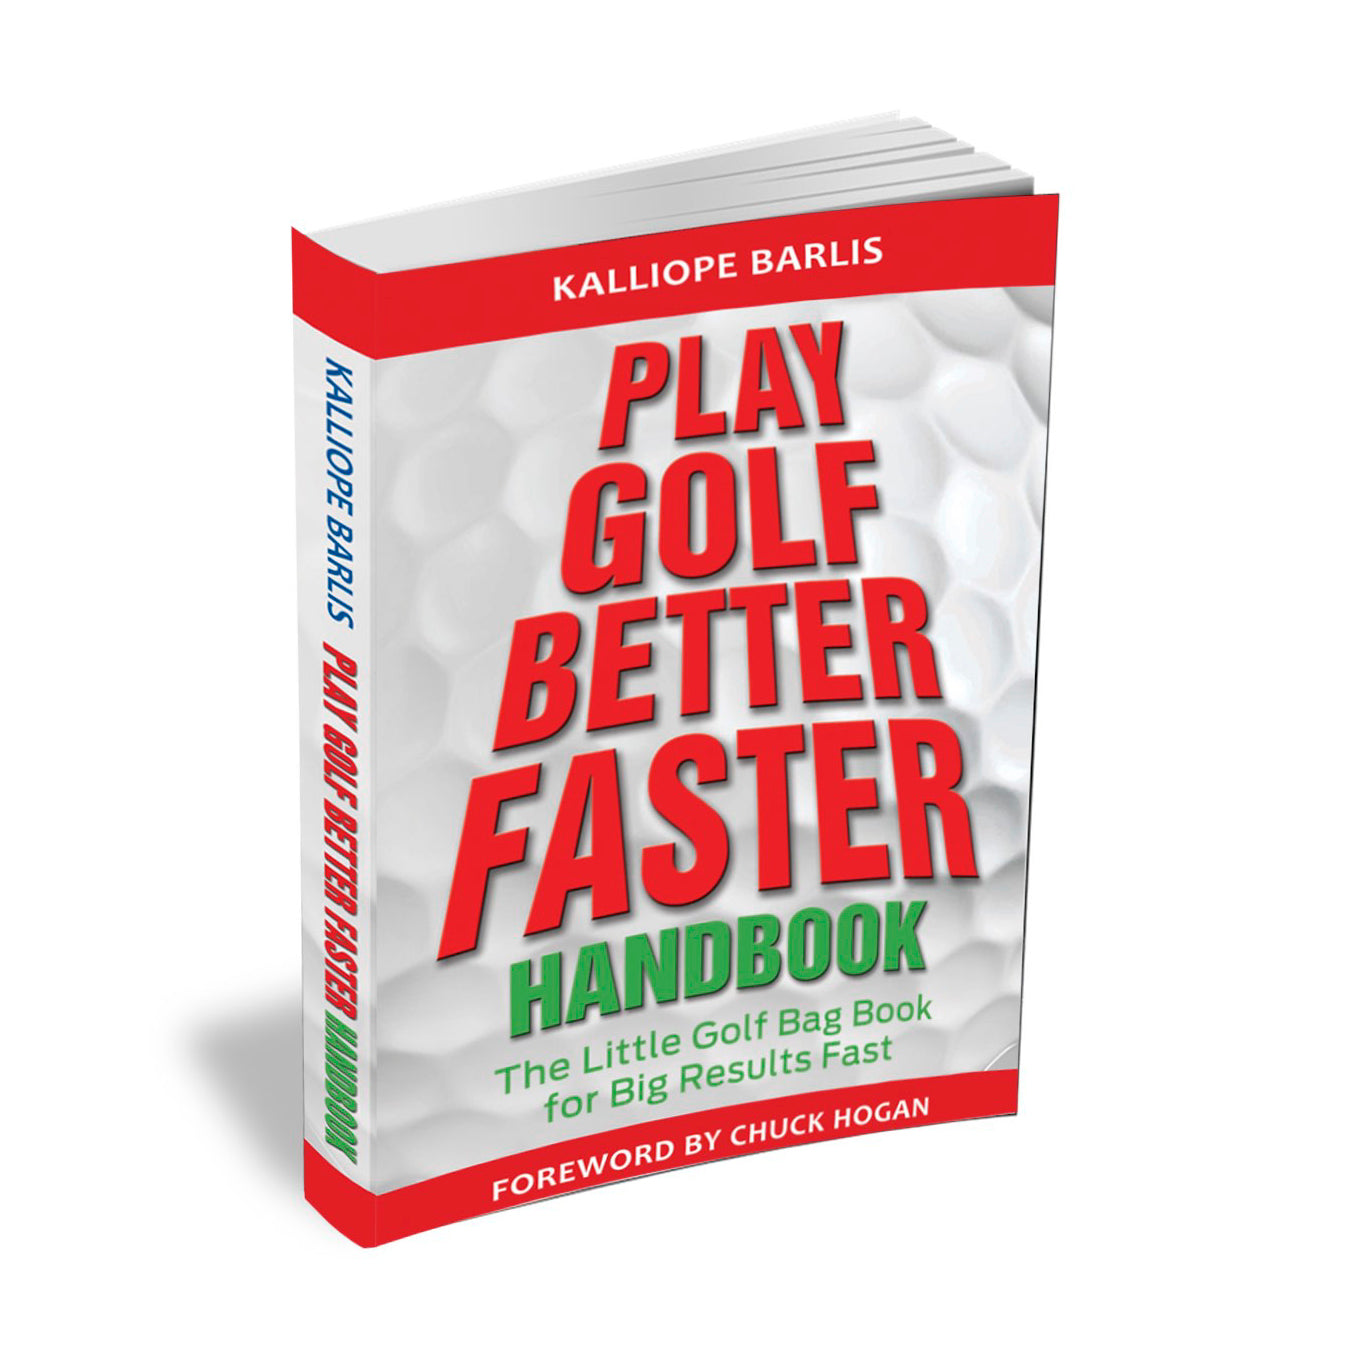 Play Golf Better Faster Golf Bag Book Autographed by Author